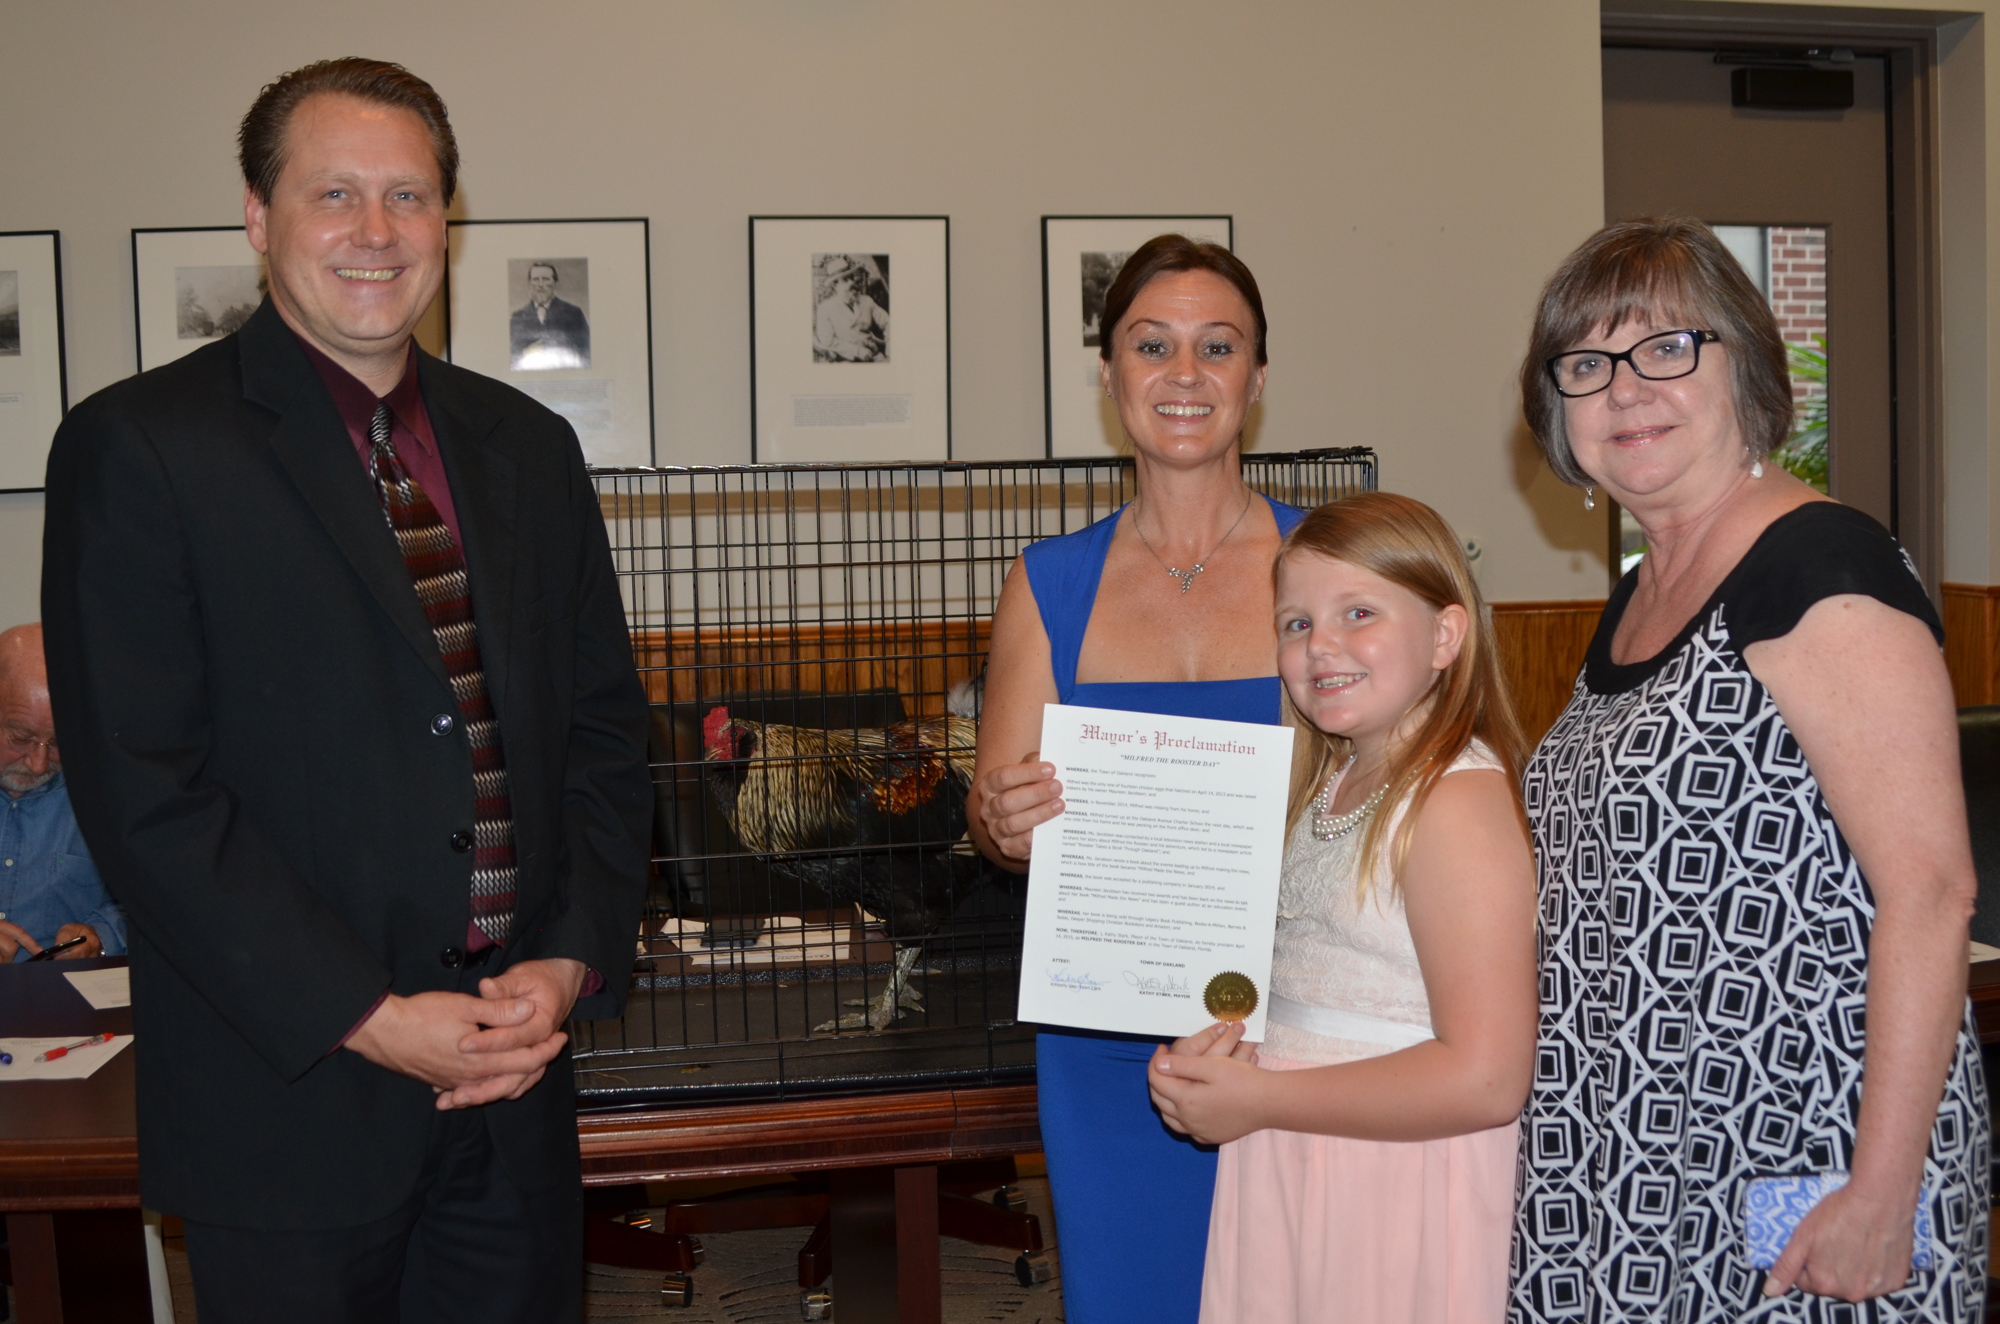 Oakland Mayor Kathy Stark, right, presents a proclamation in April 2015 to Milfred the rooster and the Jacobson family: Jeff, Maureen and Hannah.